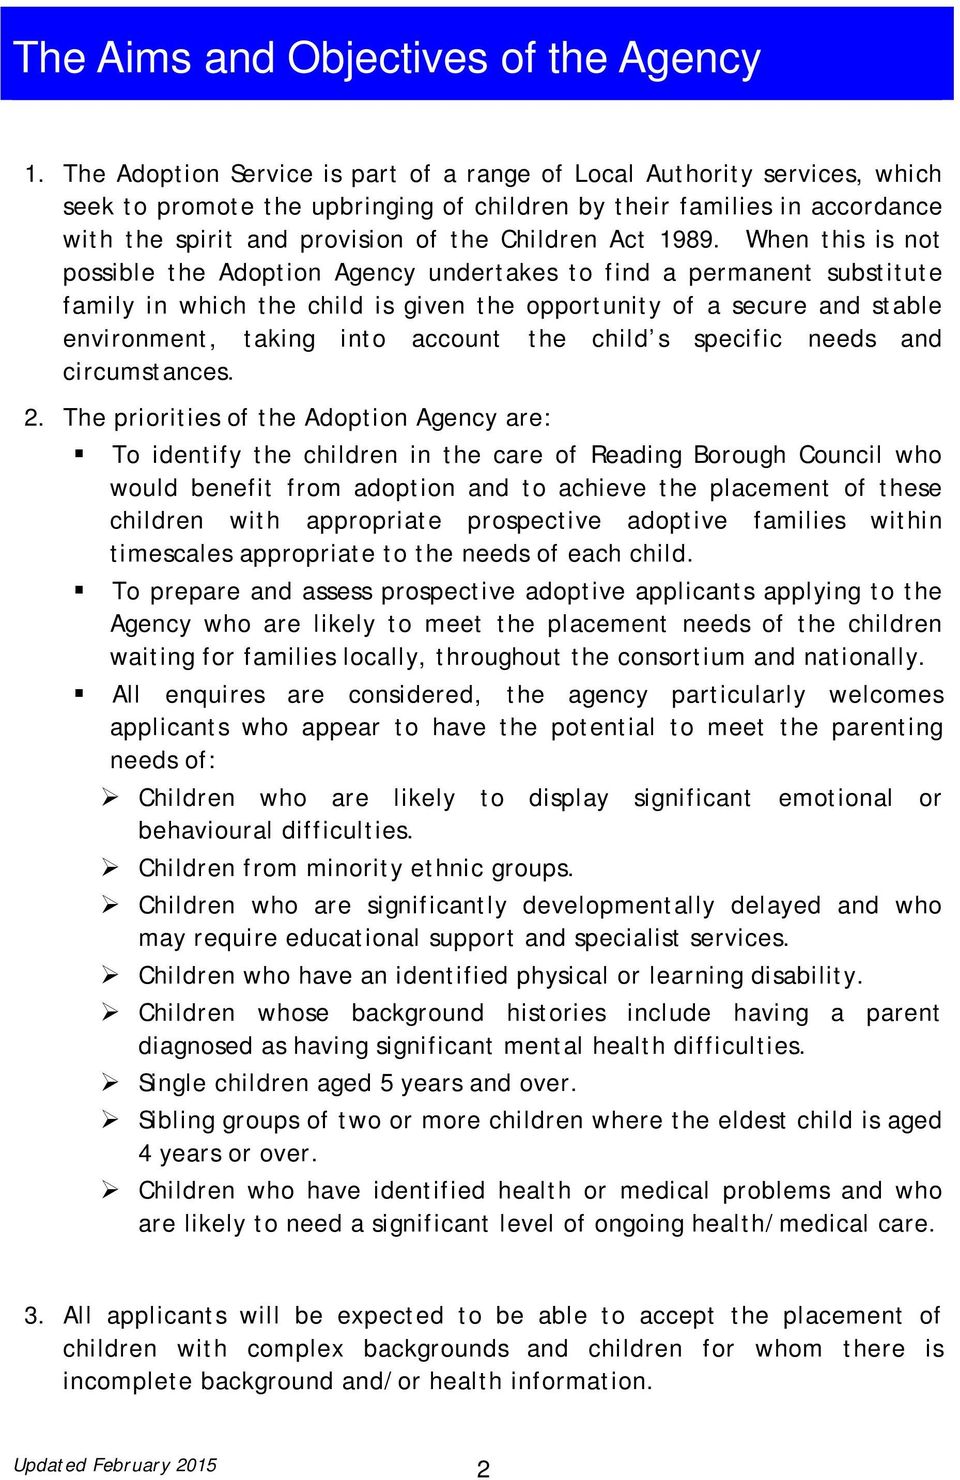 1989. When this is not possible the Adoption Agency undertakes to find a permanent substitute family in which the child is given the opportunity of a secure and stable environment, taking into